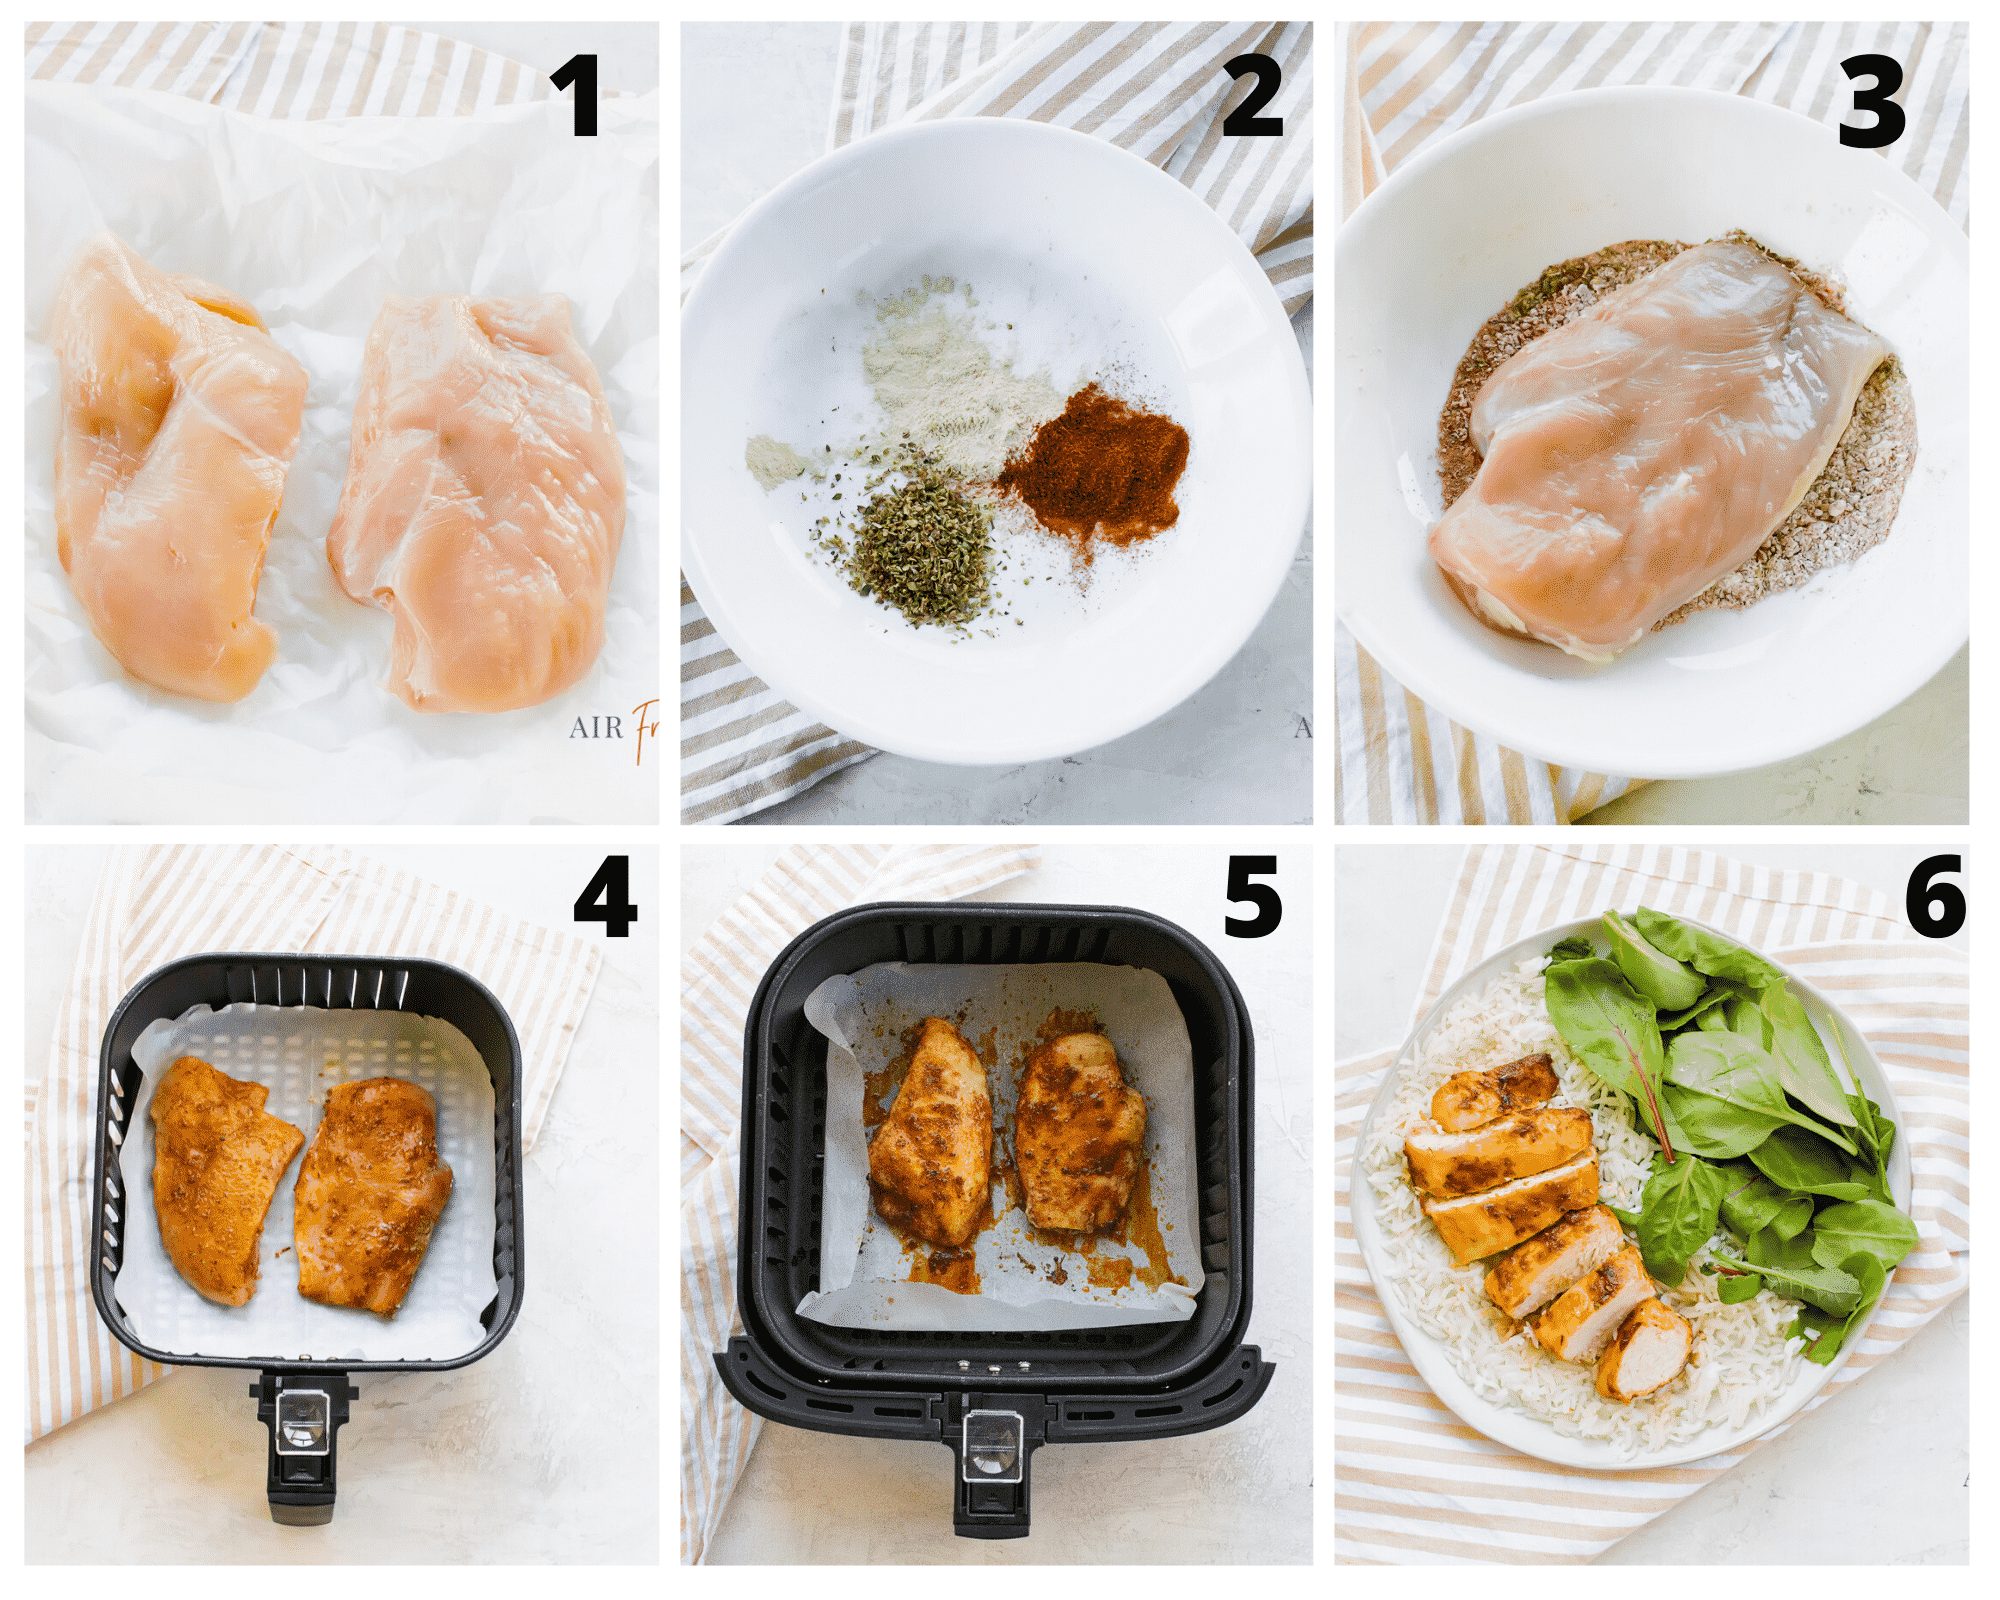 photo collage showing 6 steps needed to make air fryer chicken breast.